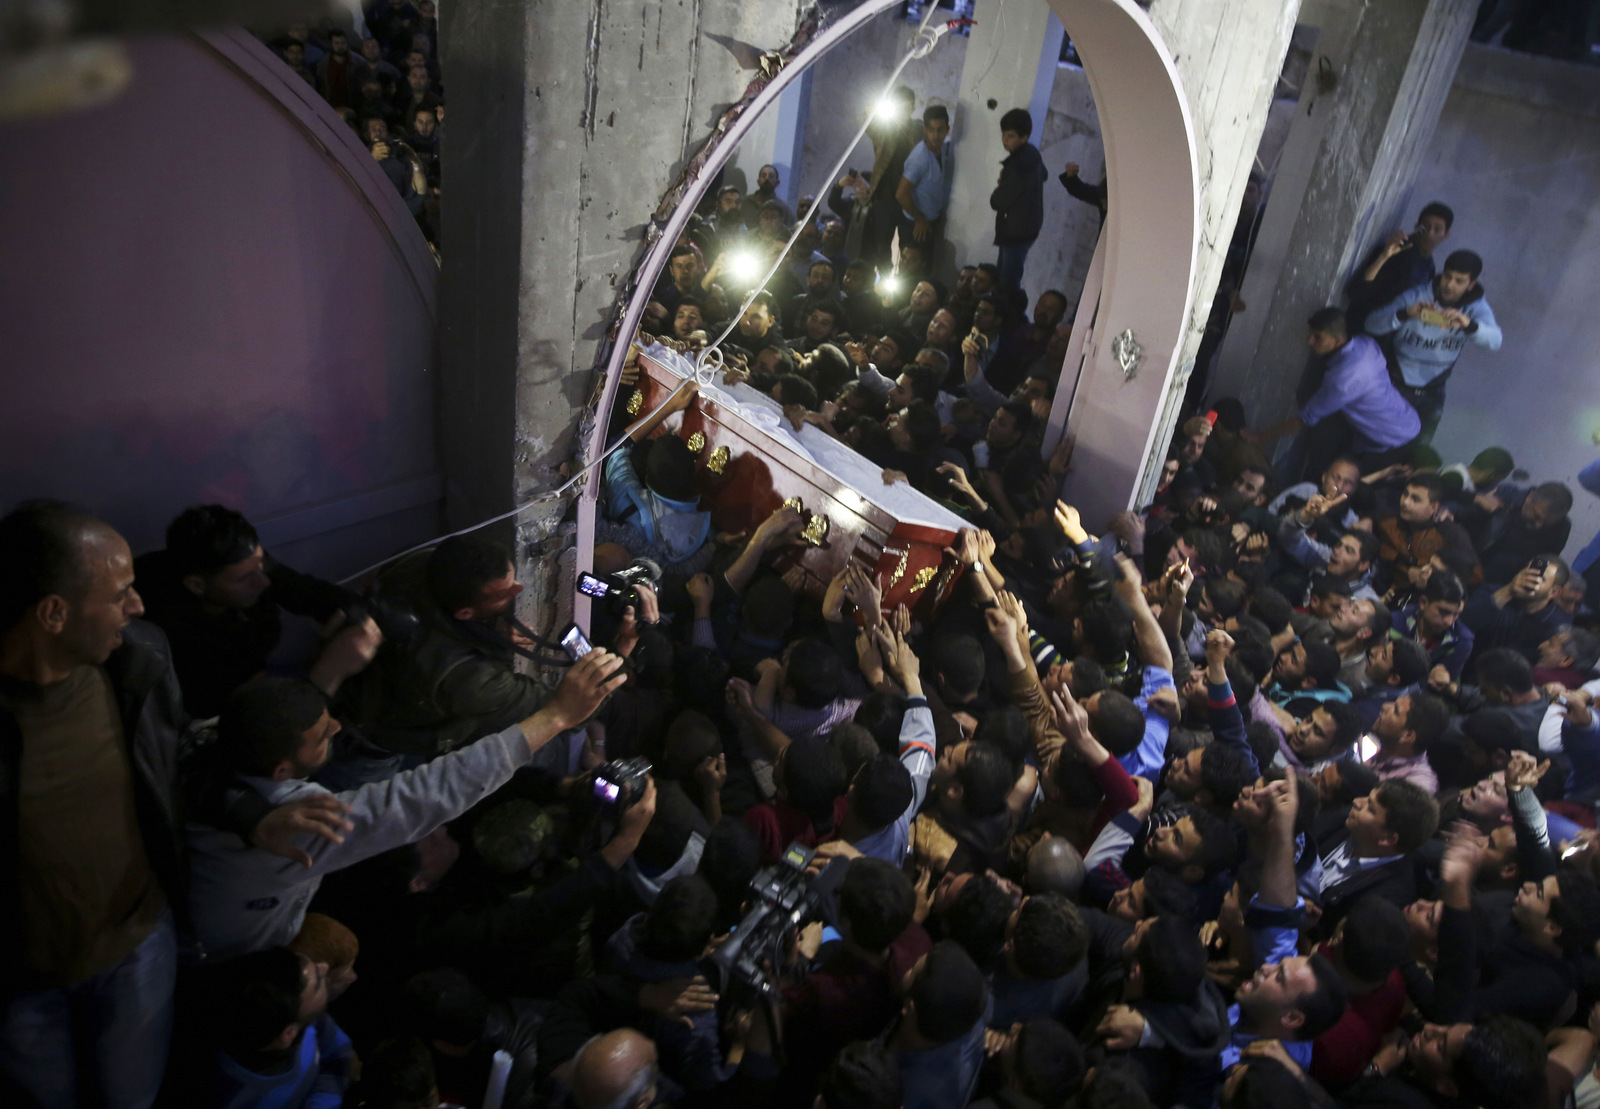 Mourners carry the coffin of Palestinian scientist Fadi al-Batsh, after his body crossed into the Gaza Strip from Egypt during his funeral April 26, 2018. (AP/Adel Hana)